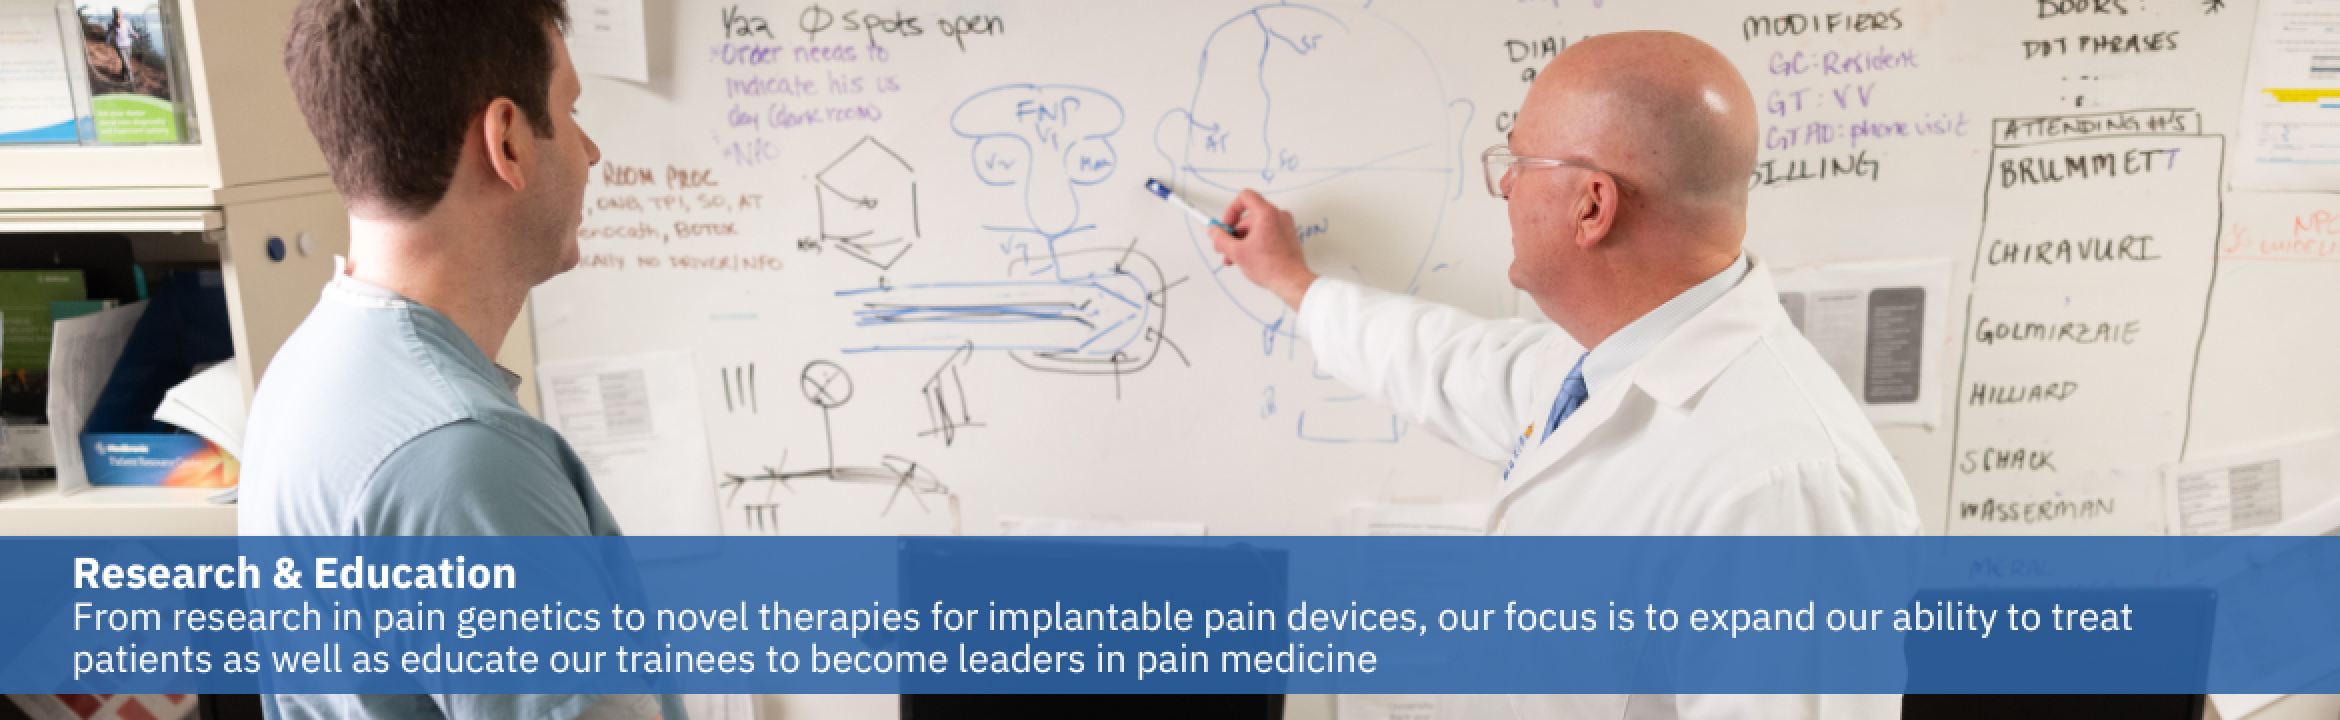 Text: From research in pain genetics to novel therapies for implantable pain devices, our focus is to expand our ability to treat patients as well as educate our trainees to become leaders in pain medicine